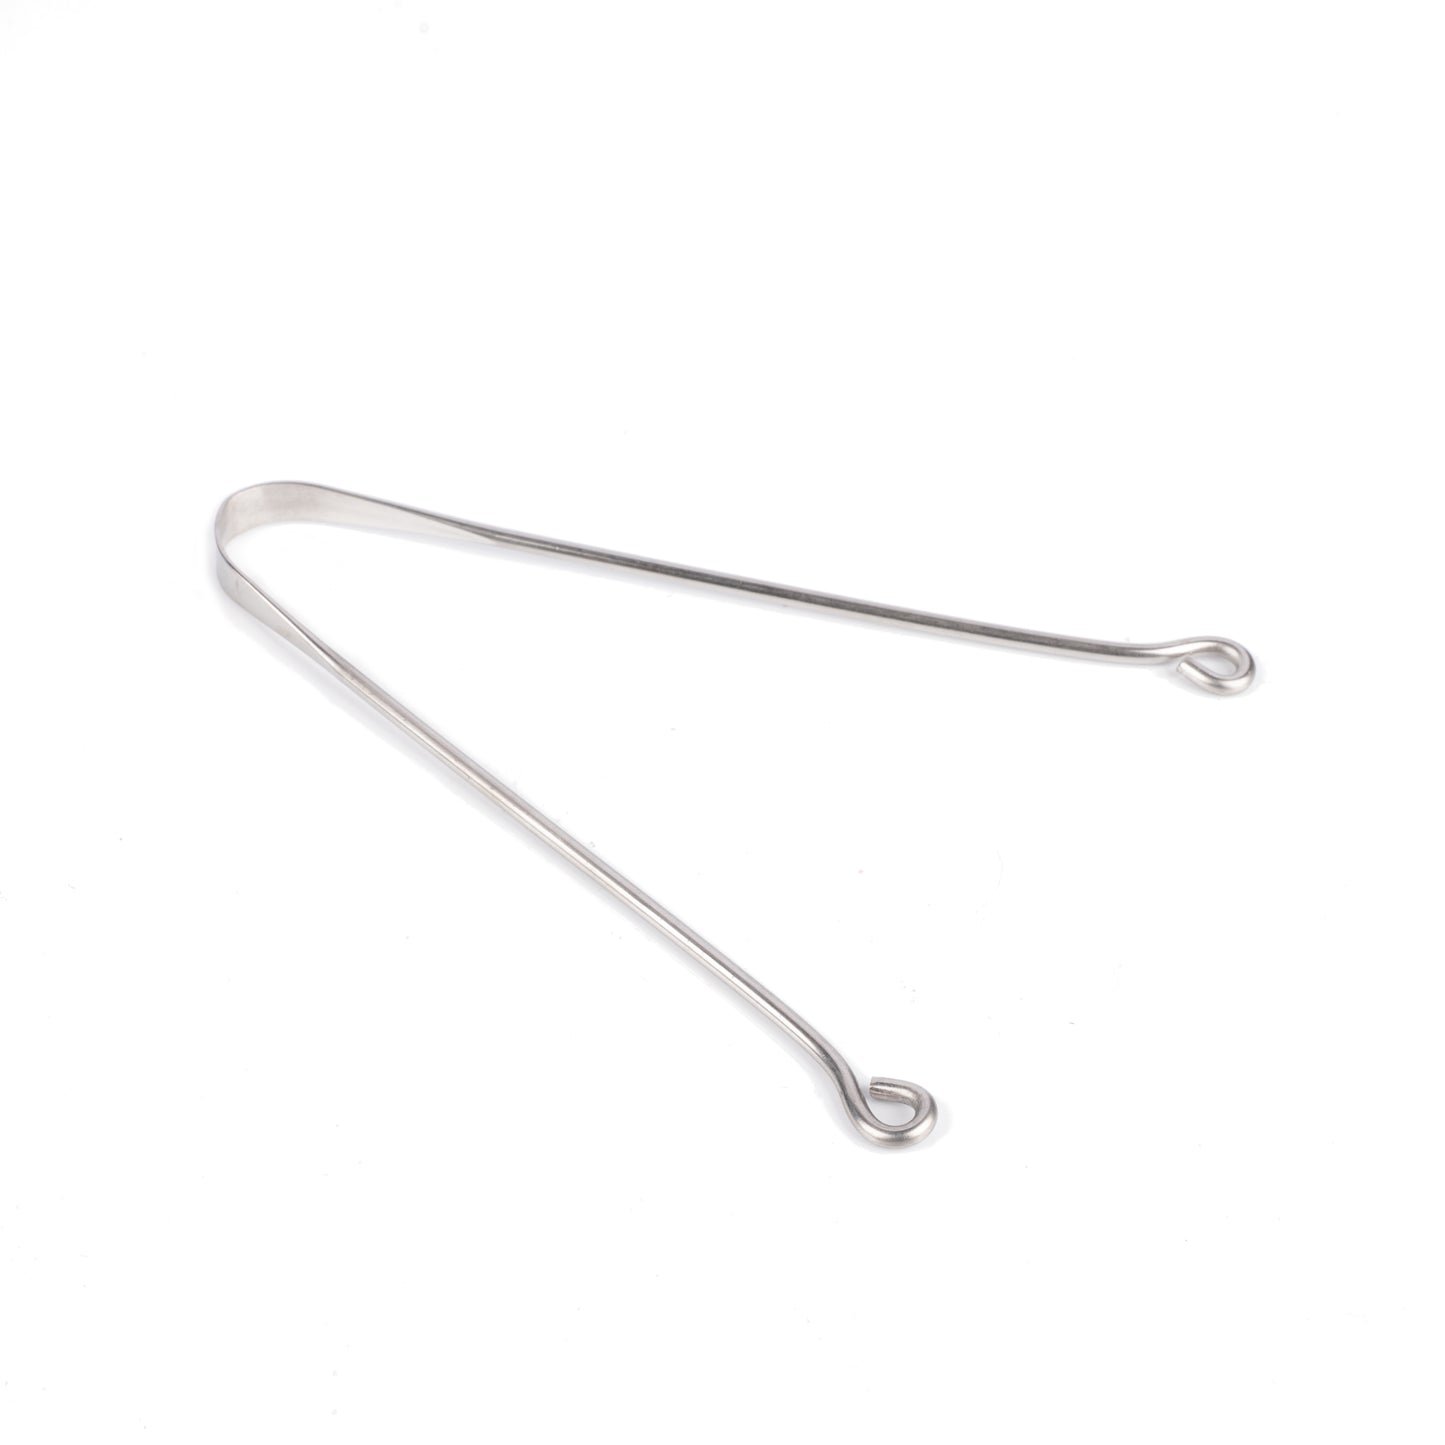 Basket Bum's RoundGlide Steel Tongue Scraper with a Rounded Base